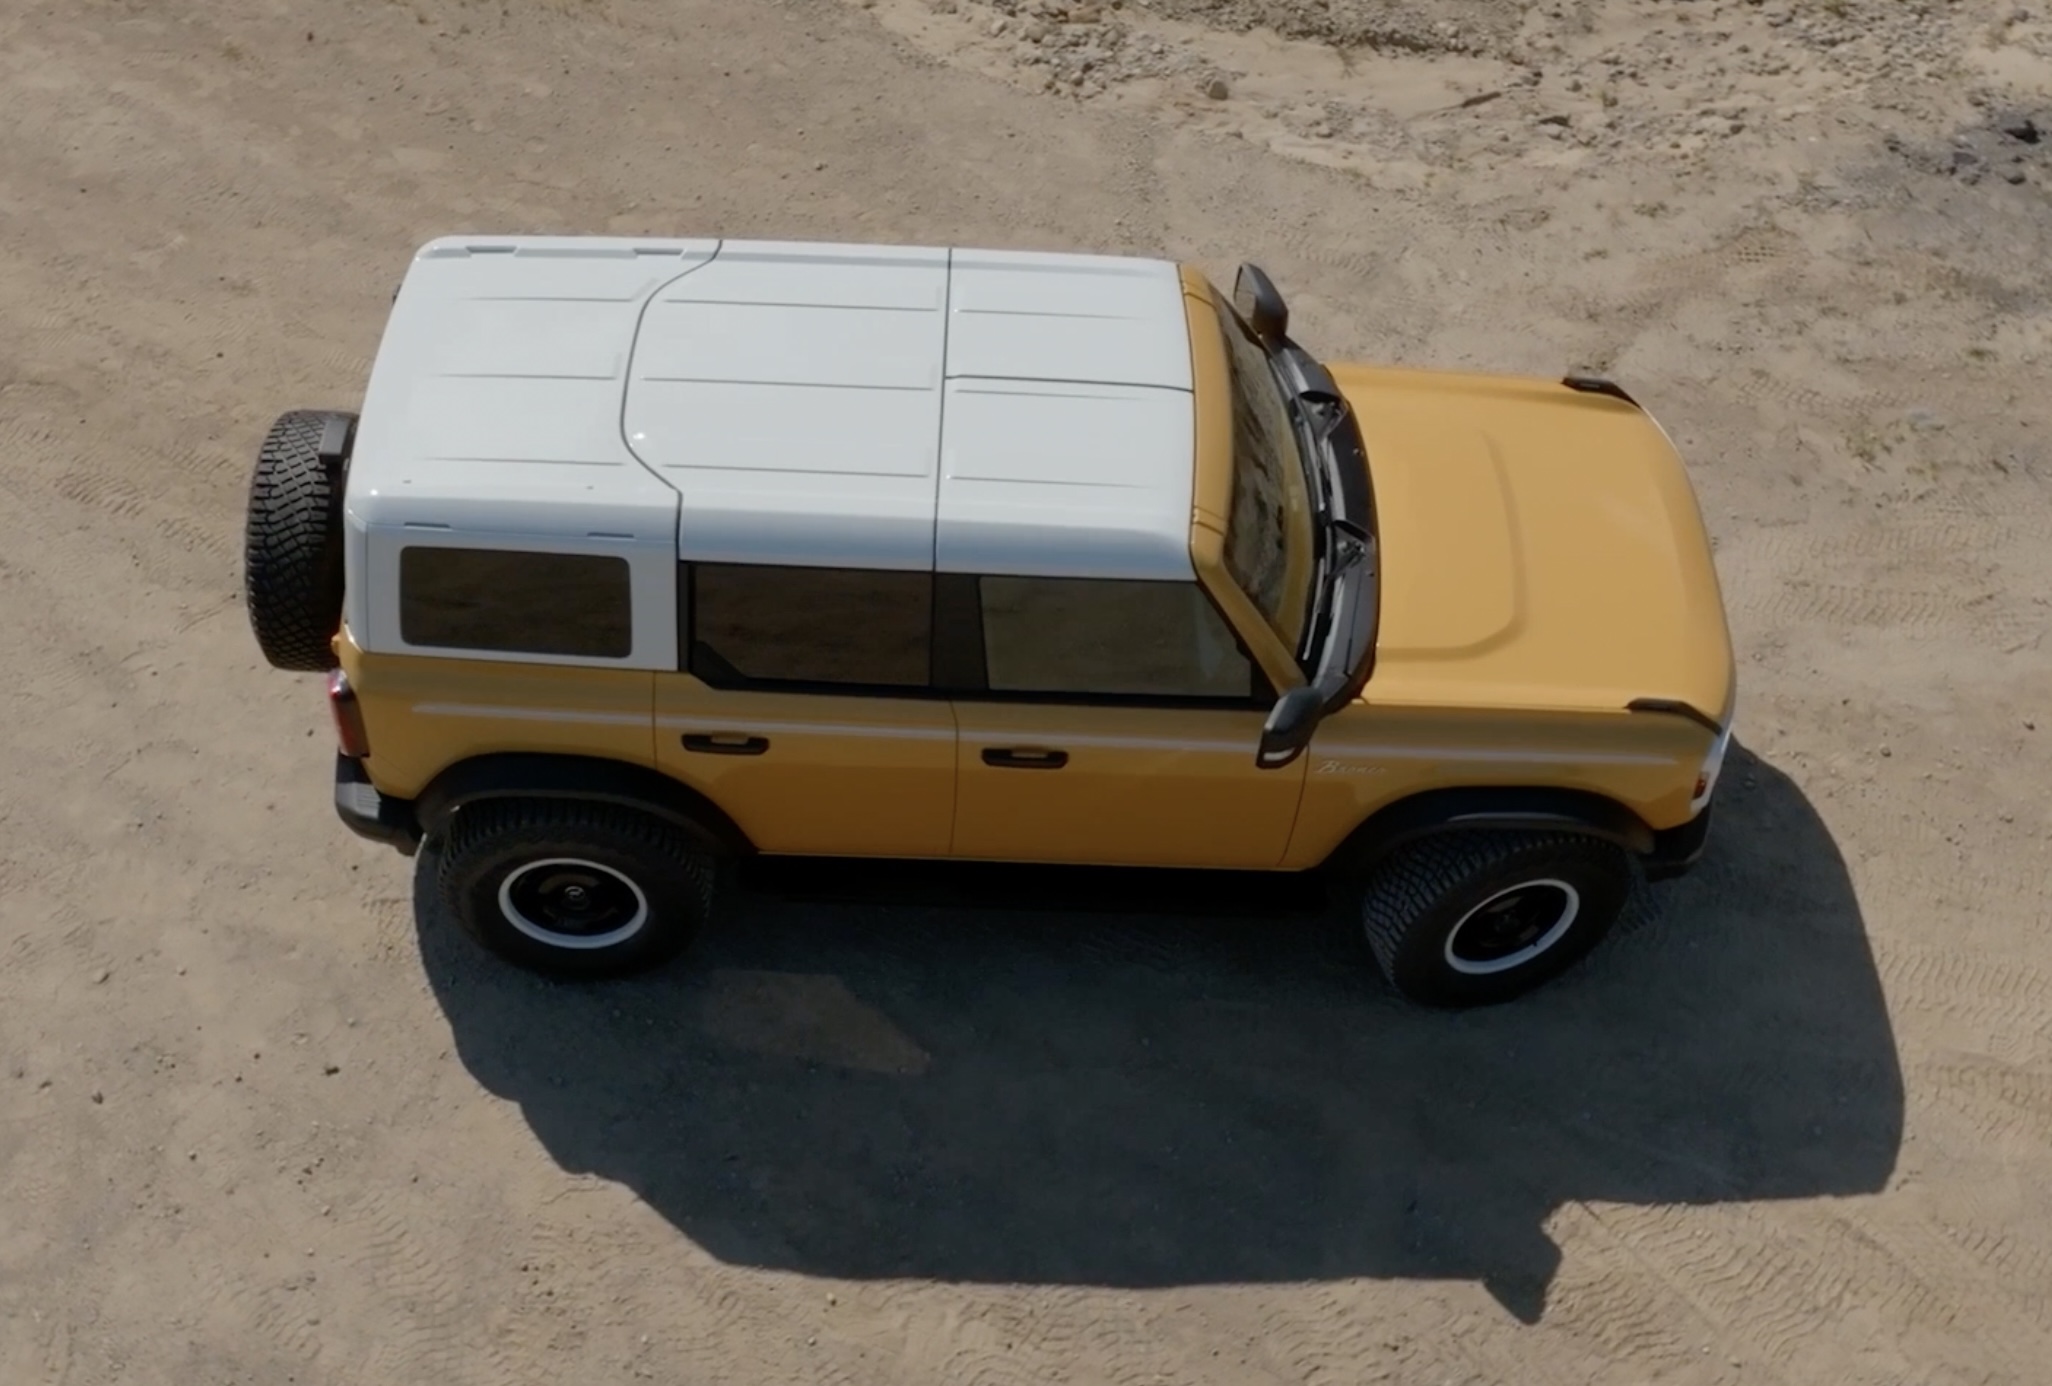 Ford Bronco 2023 Bronco Heritage Edition Revealed! 1,966 Heritage Limited Edition (Badlands) Units to be Produced. Unlimited (Big Bend) Heritage Editions wstone-metallic-2023-bronco-heritage-edition-9-